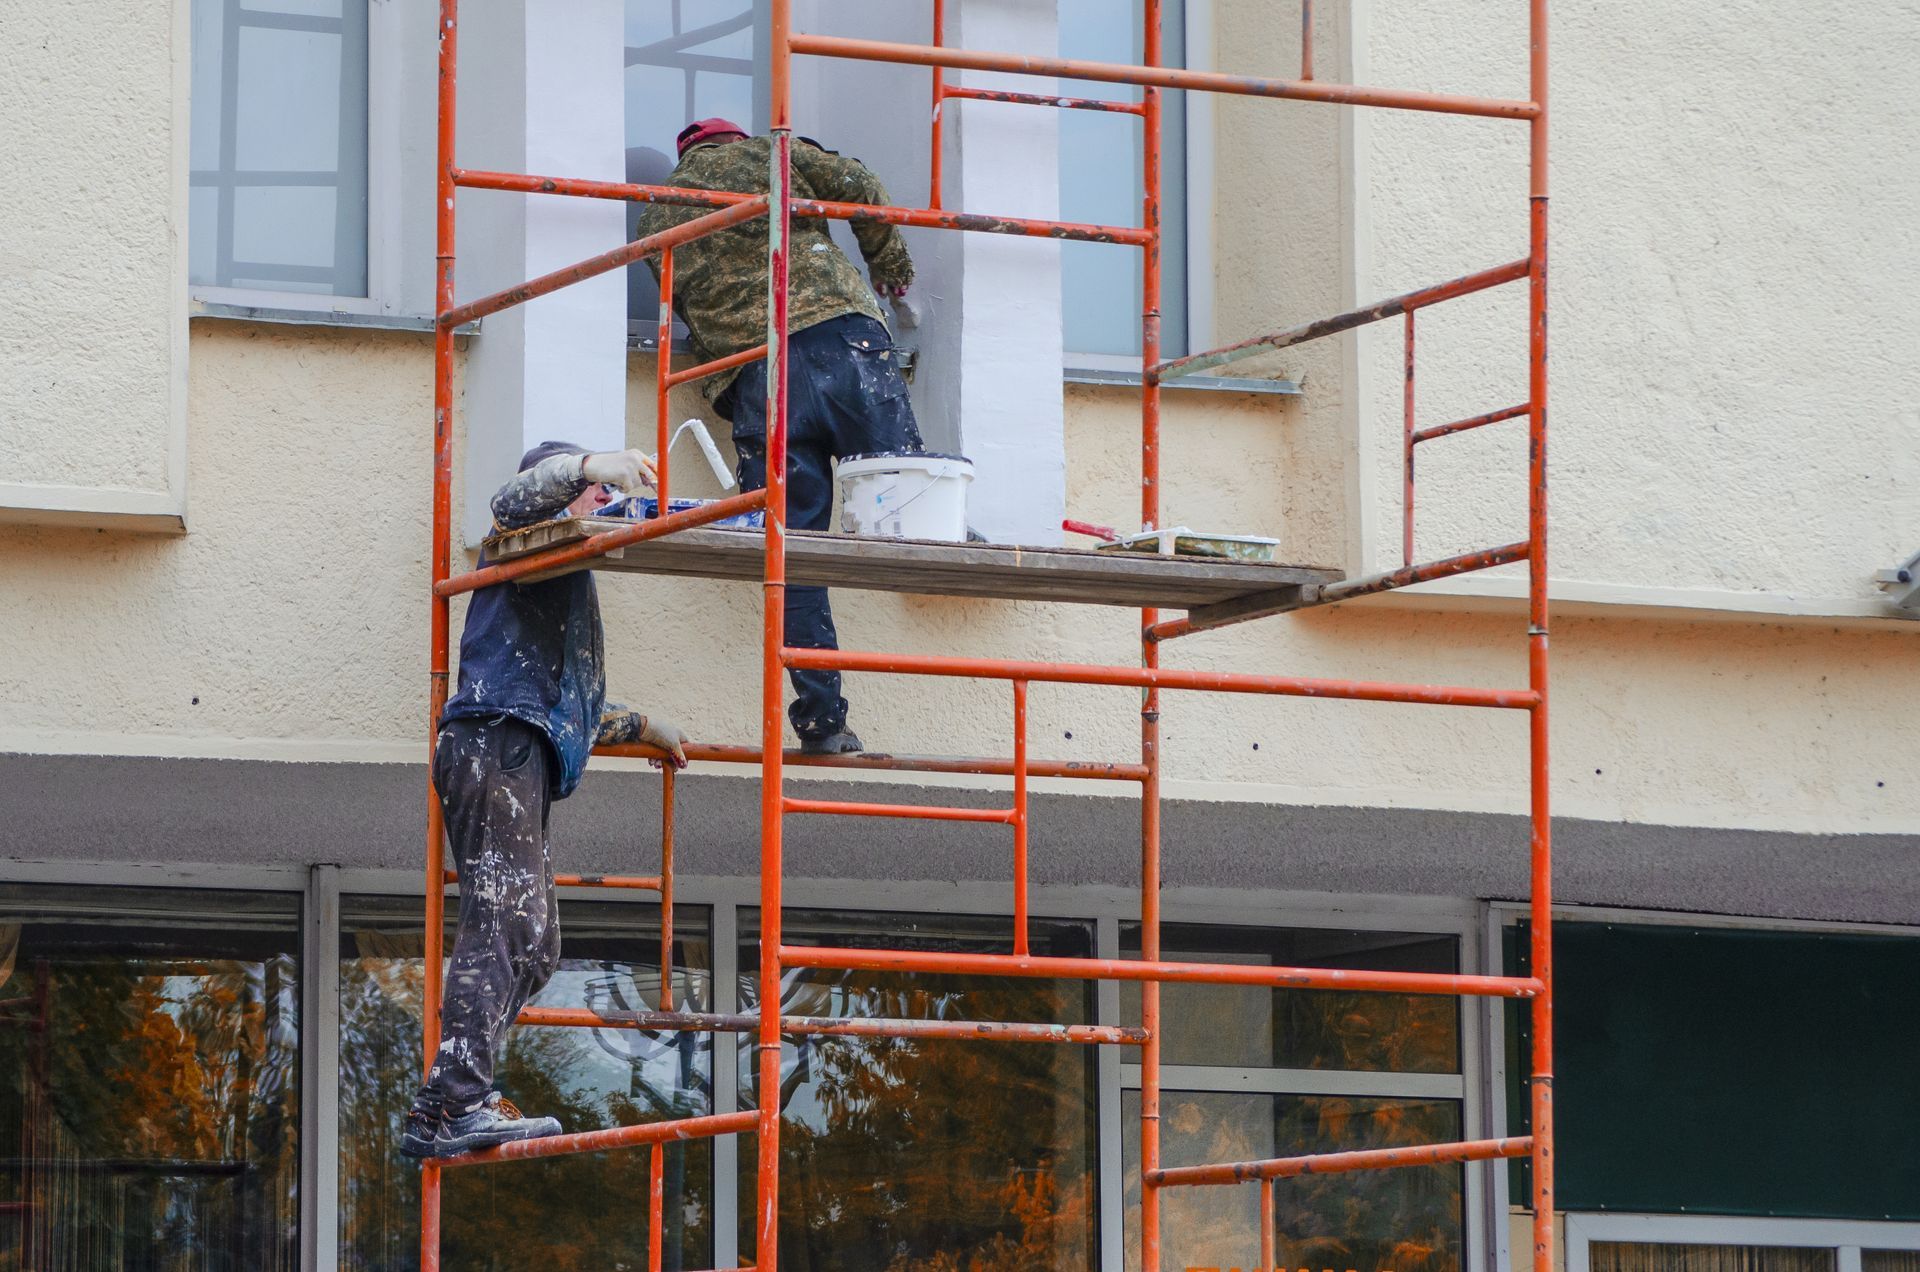 Two professional painters diligently working together, applying fresh coats of paint to the exterior of a building.